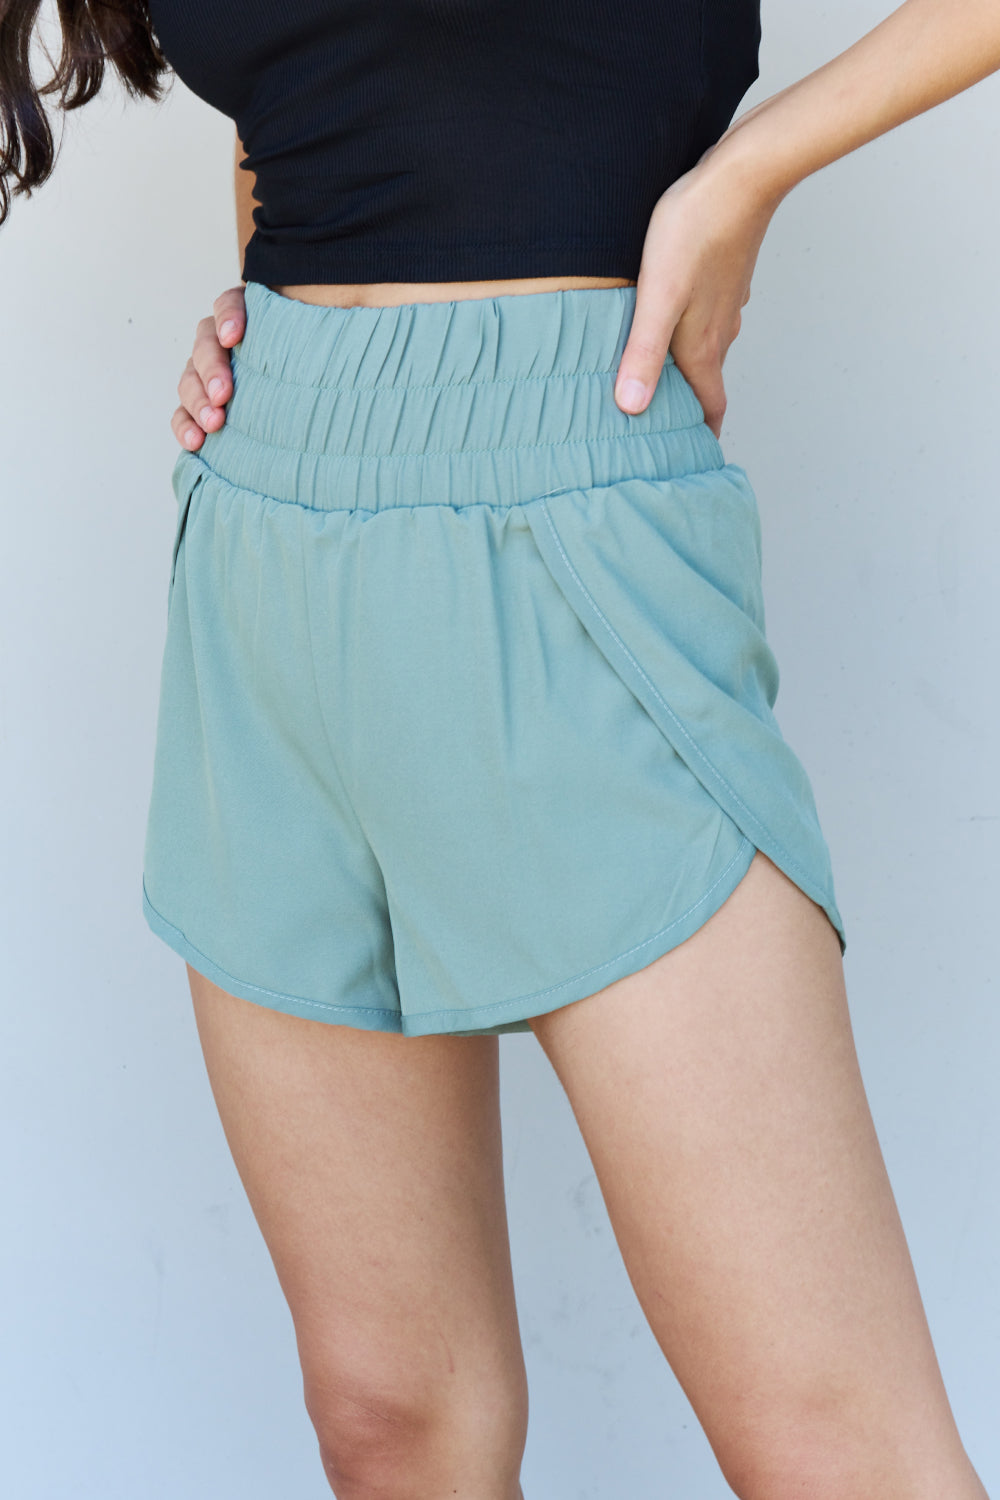 Ninexis Stay Active High Waistband Active Shorts in Pastel Blue free shipping -Oh Em Gee Boutique